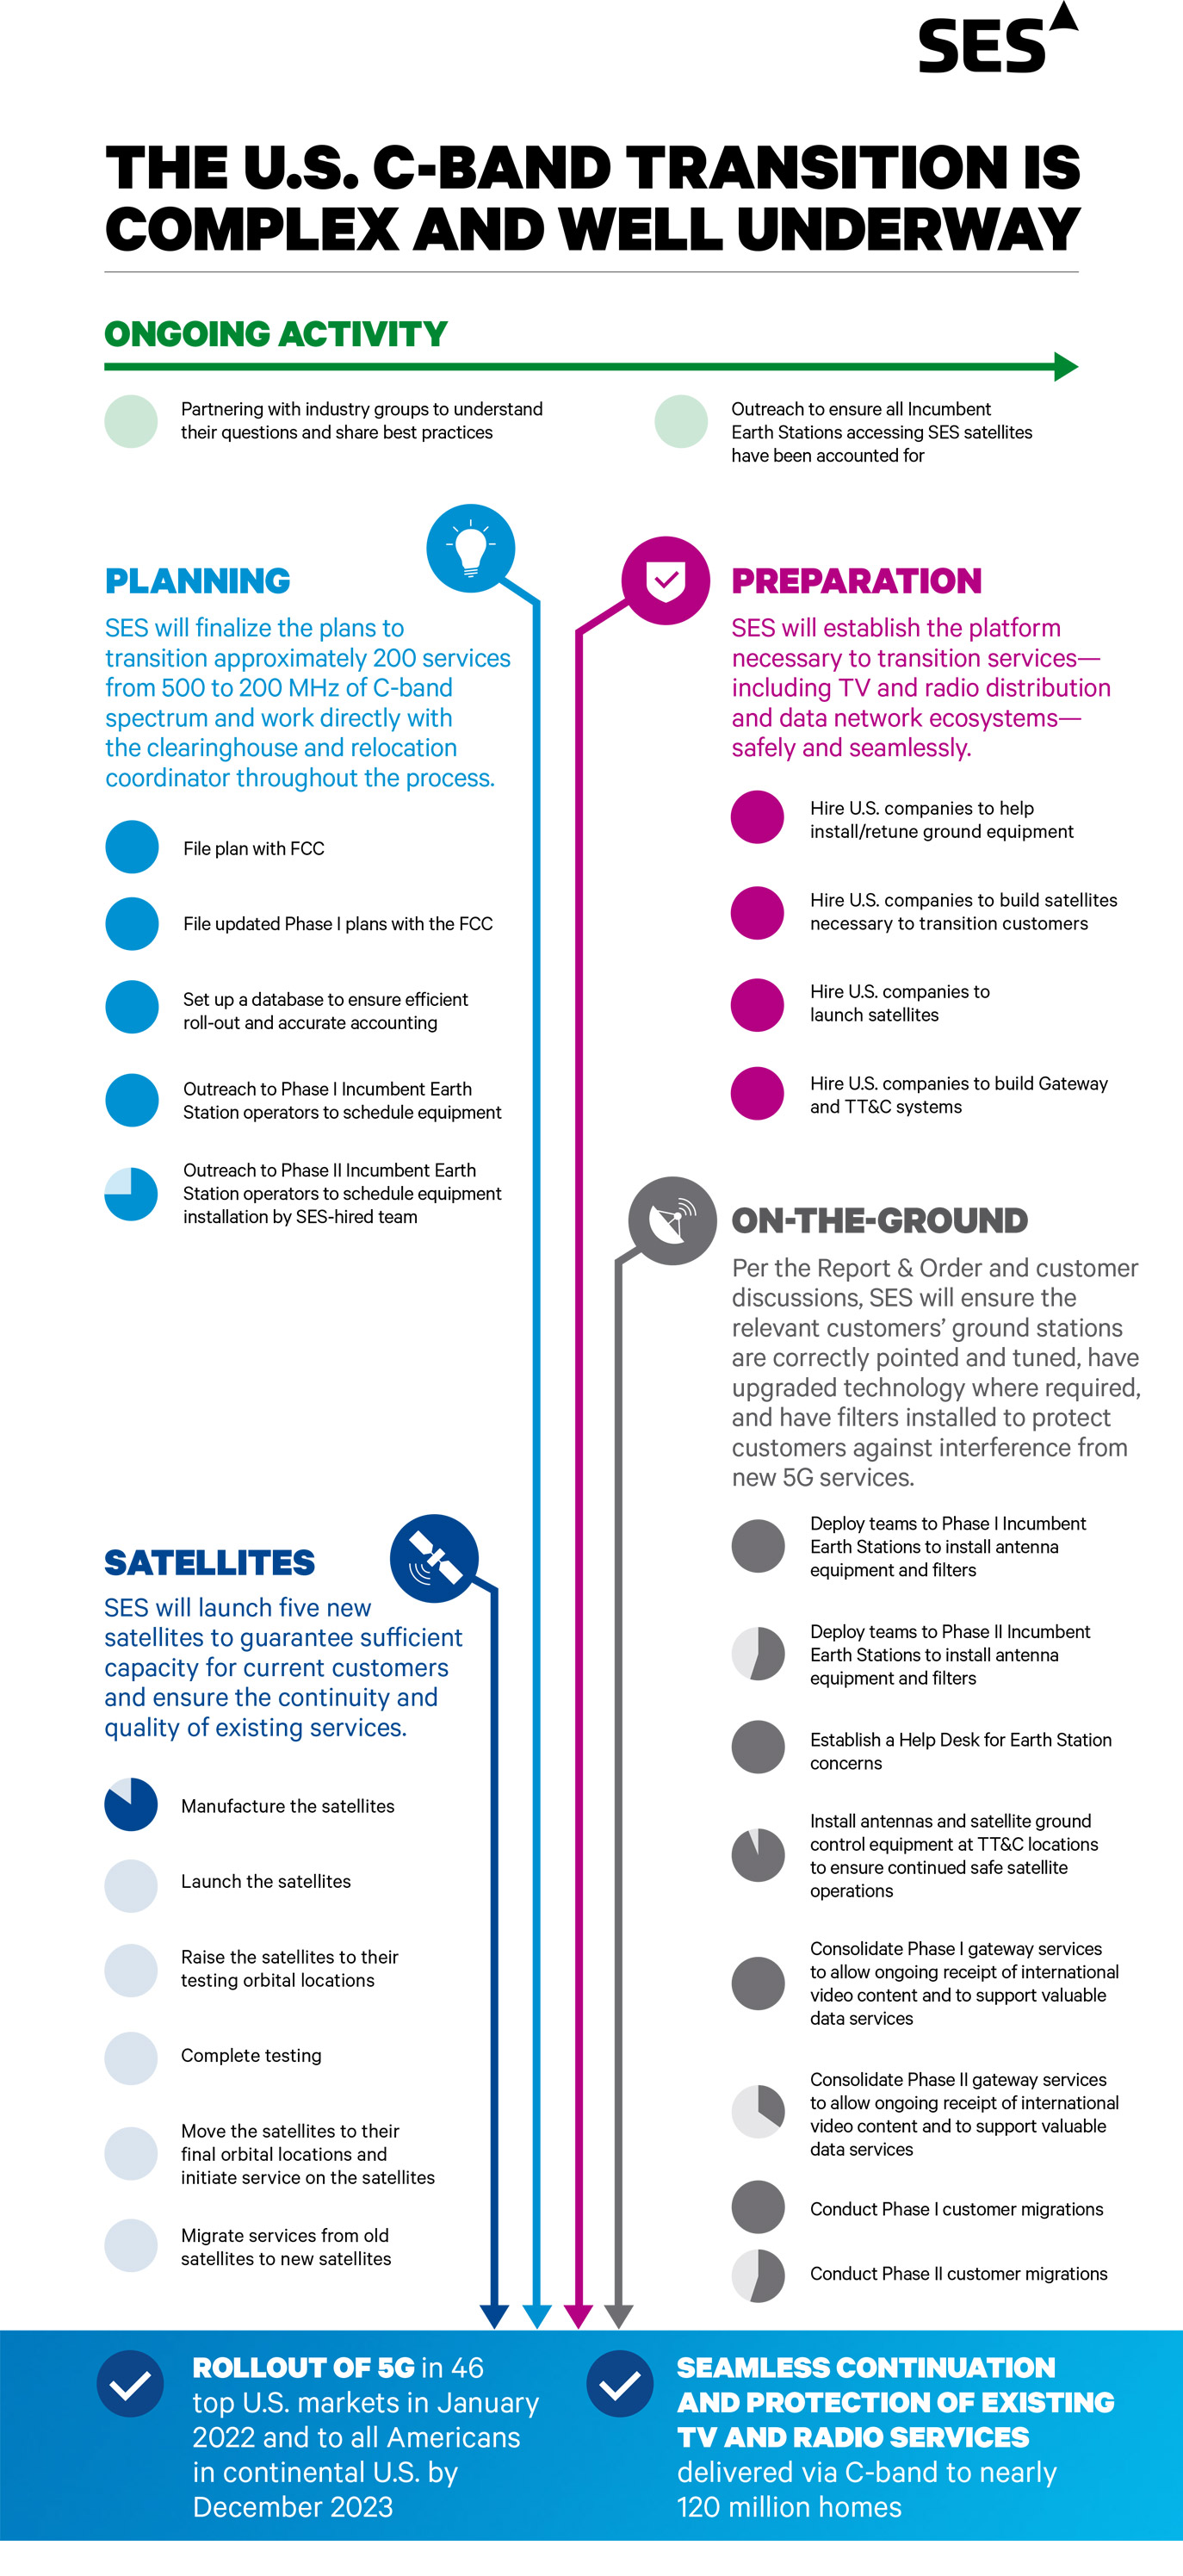 SES_C-Band_Transition_Infographic_012221